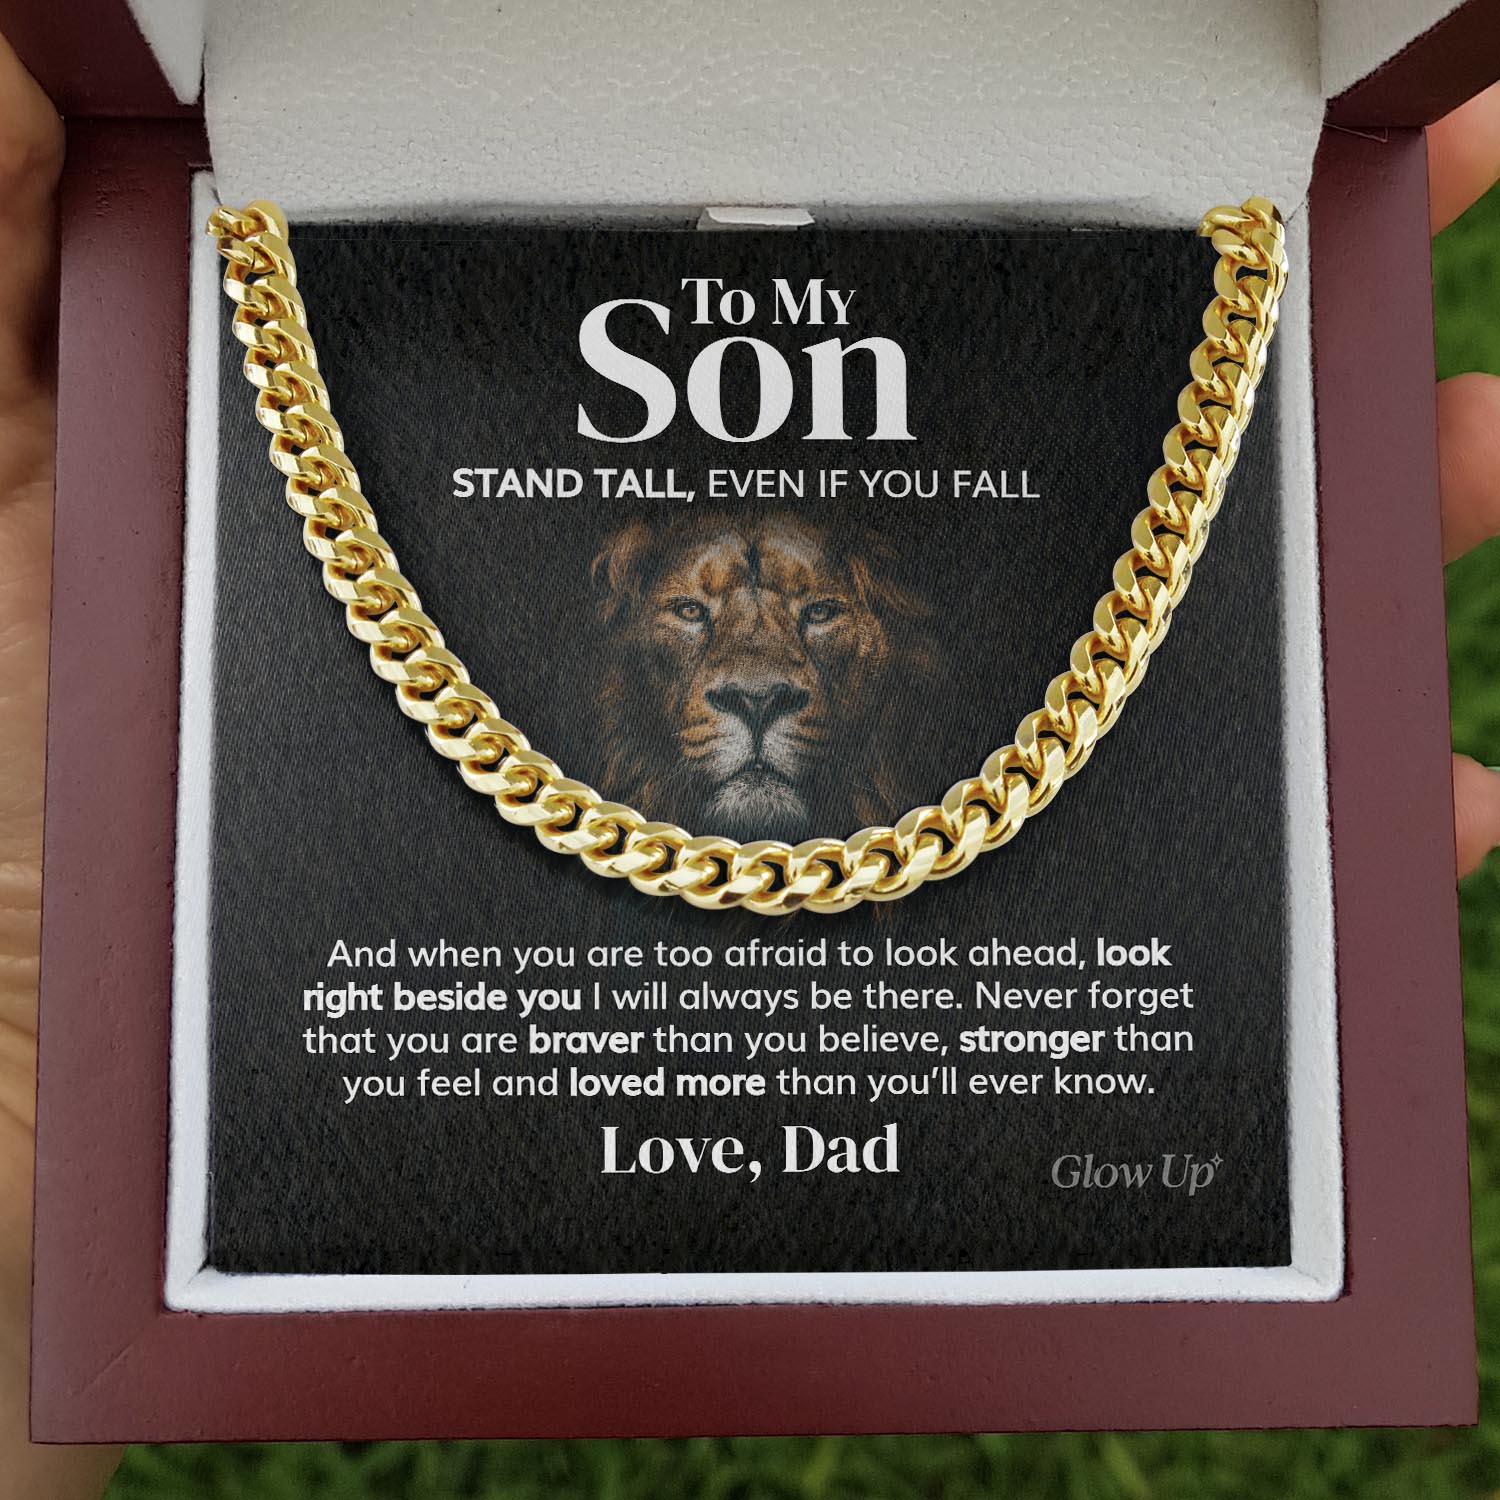 Glow Up Cuban Link Chain 18k Gold Over Stainless Steel / Luxury LED Box To my Son from Dad - 5mm Cuban Link Chain - Stand Tall